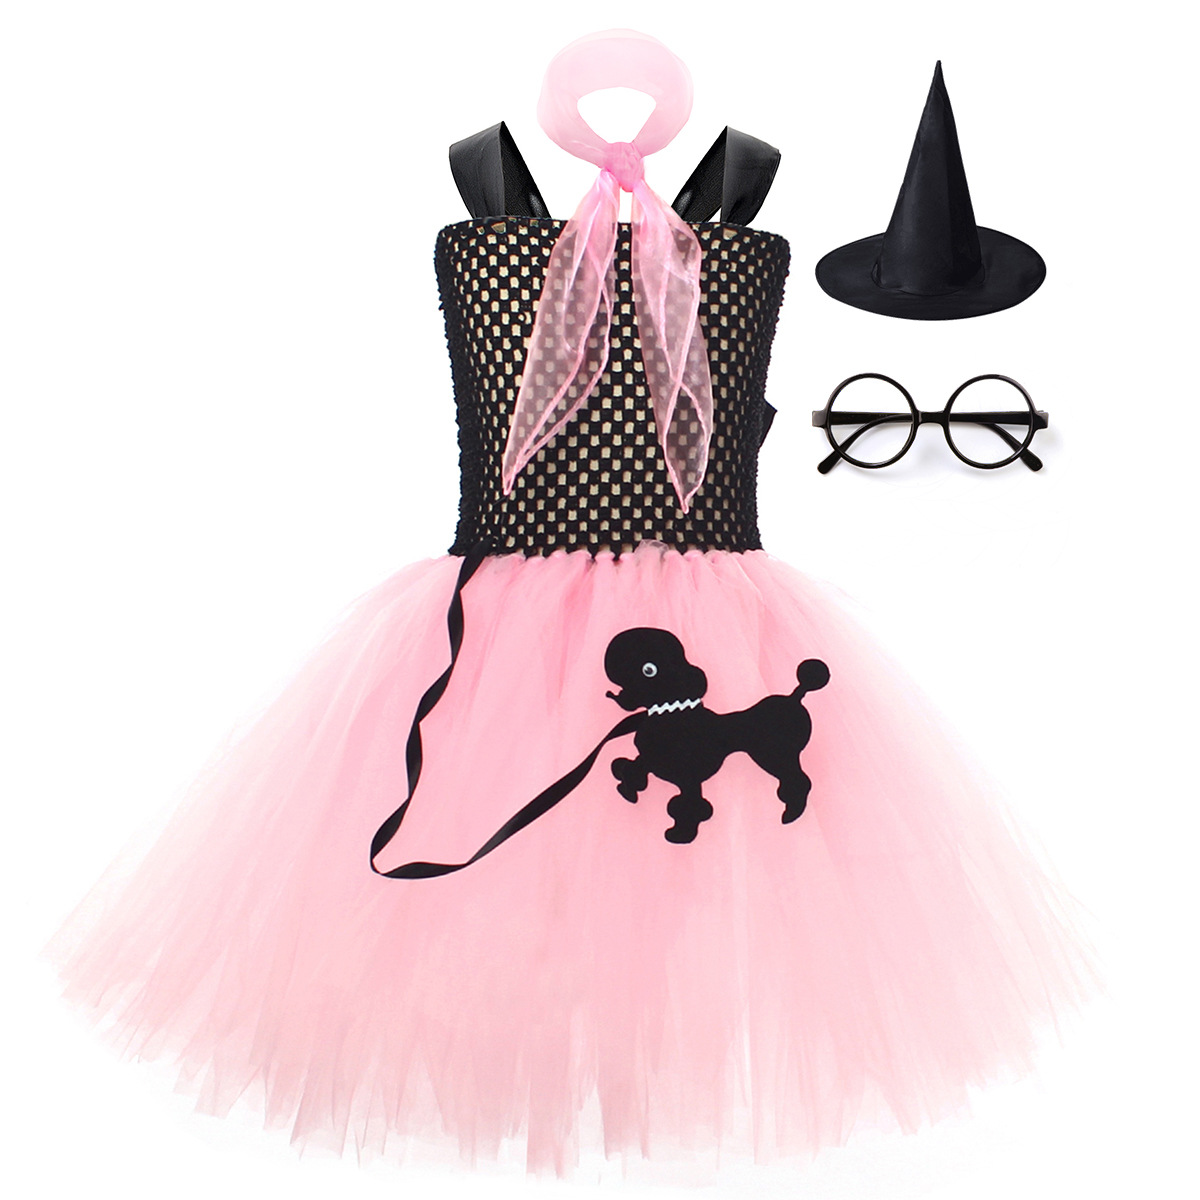 pink dress with accessories